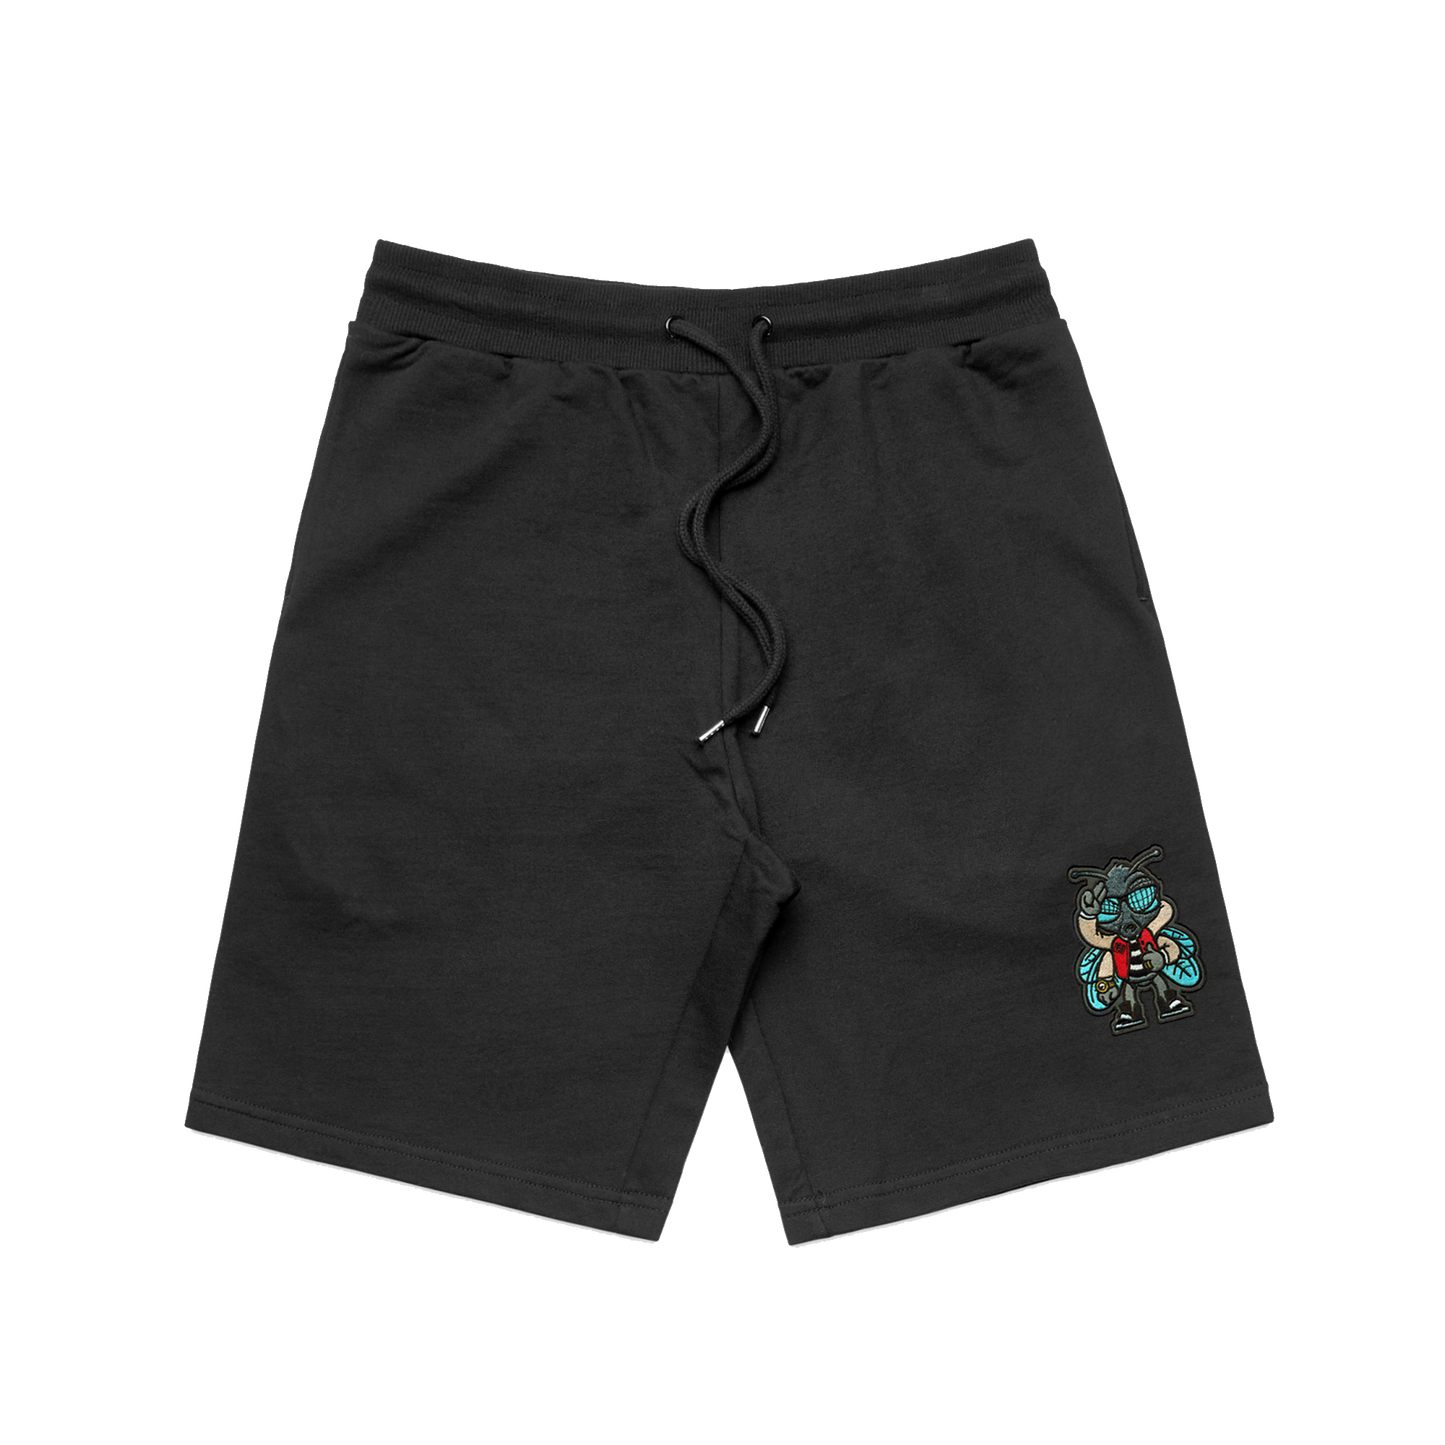 Fly Guy Embroidered Patch Sweat Shorts - Black